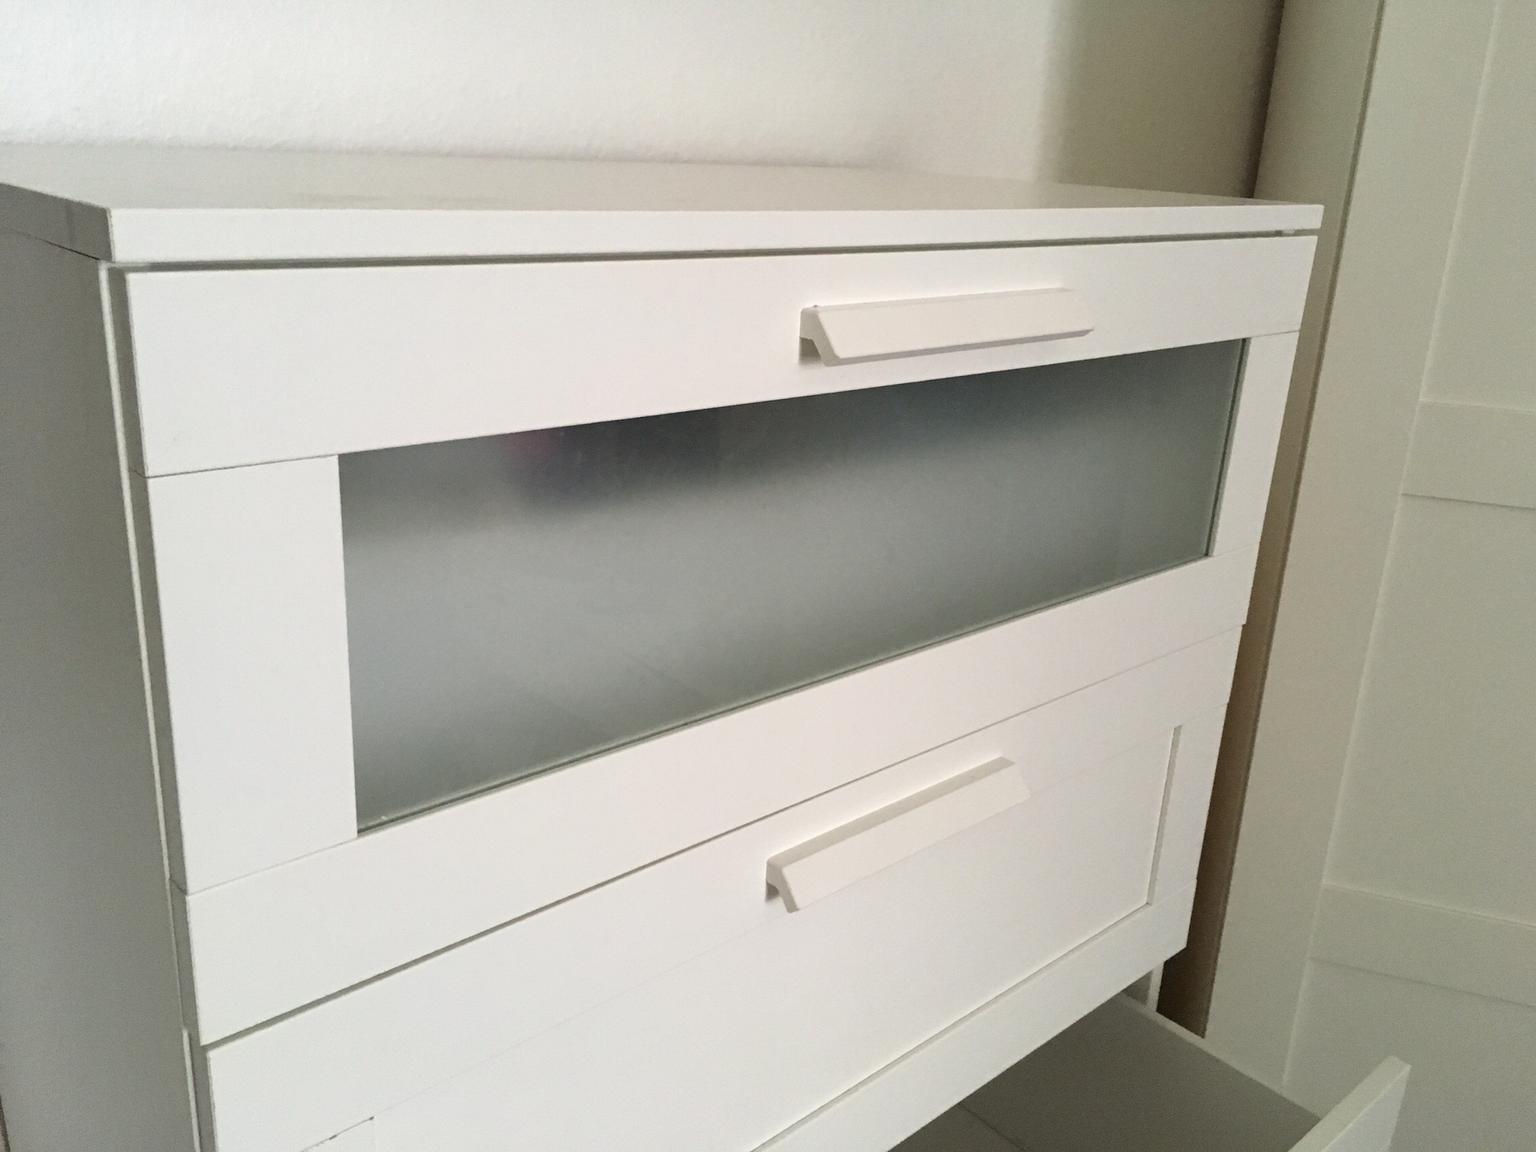 Ikea Brimnes Chest Of 4 Drawers White In Sw16 London Fur 45 00